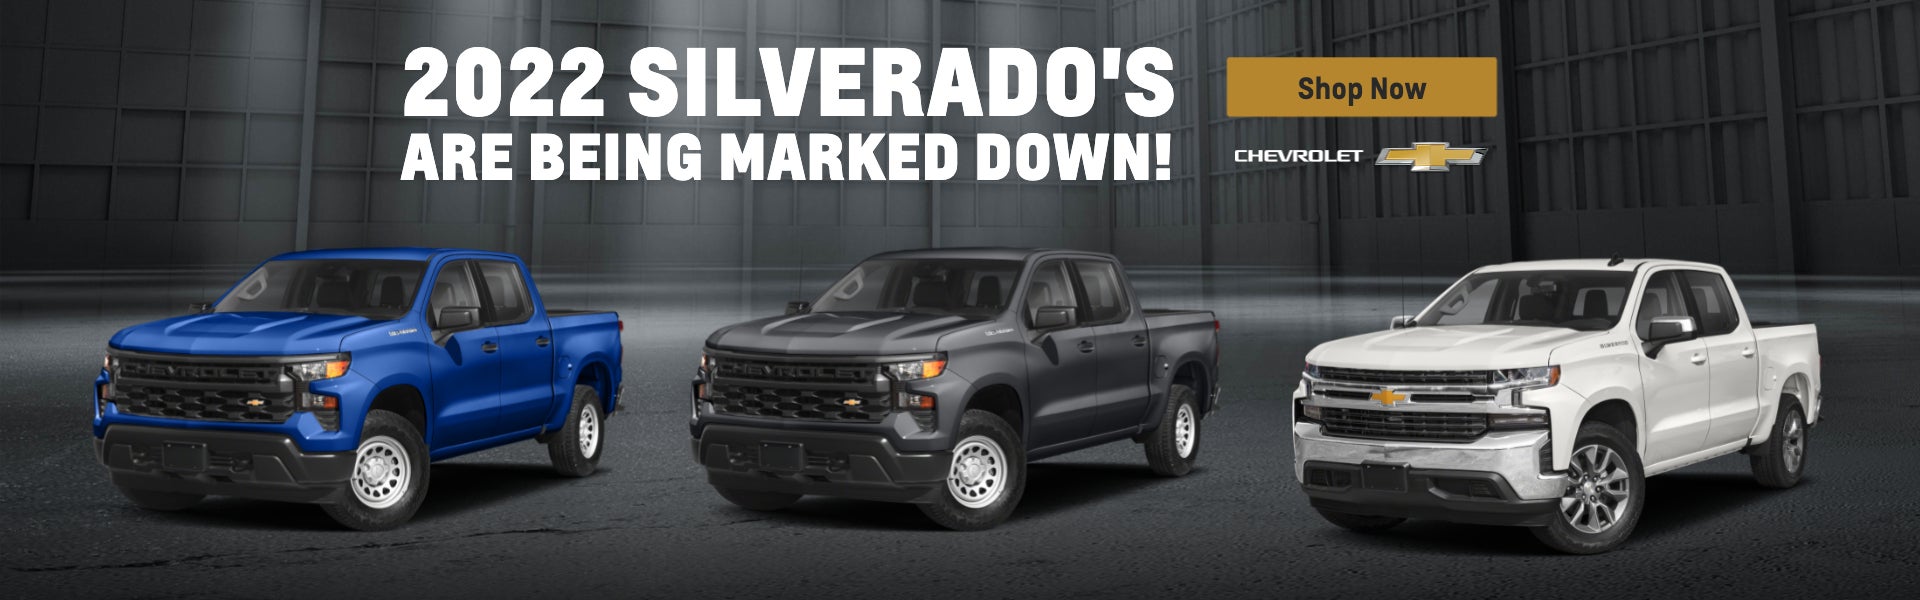 2022 Silverado's Are Being Marked Down!